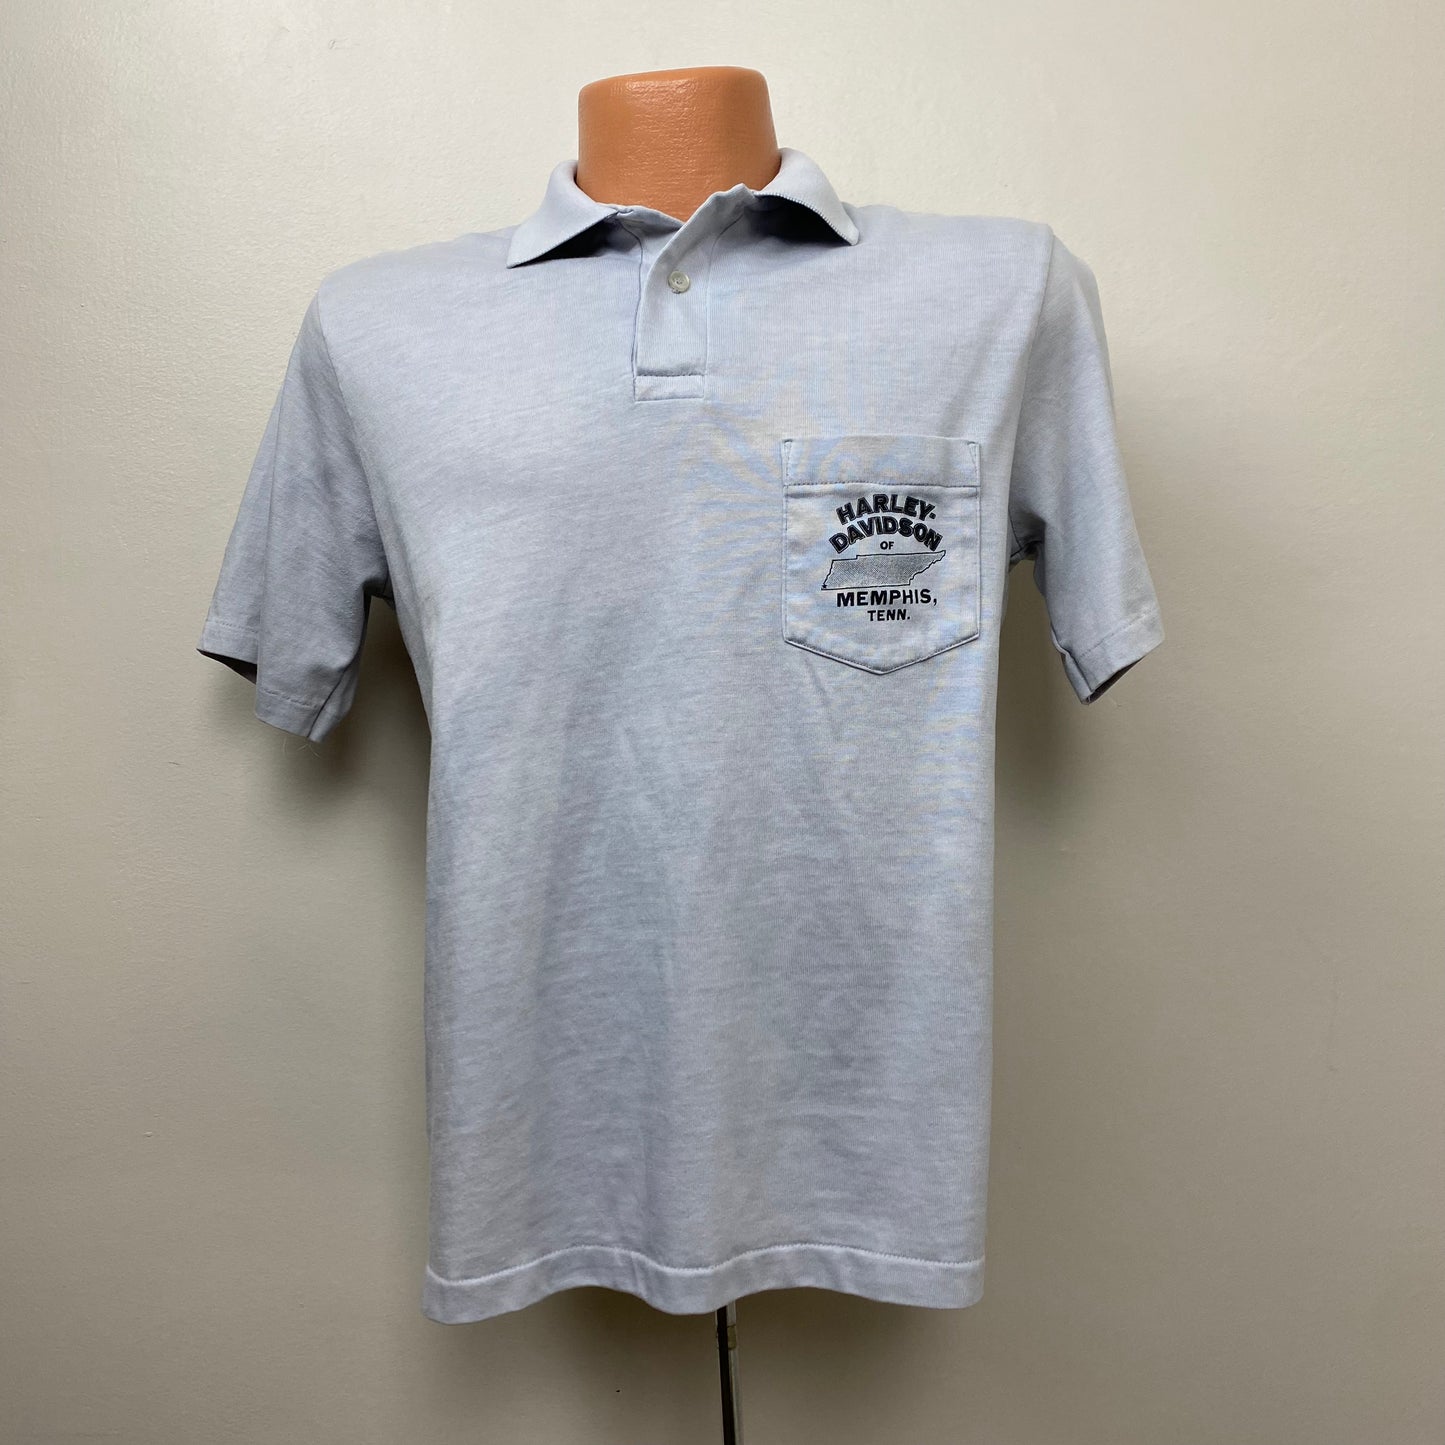 1980s Harley Davidson of Memphis Polo Shirt with Pocket, Size Large